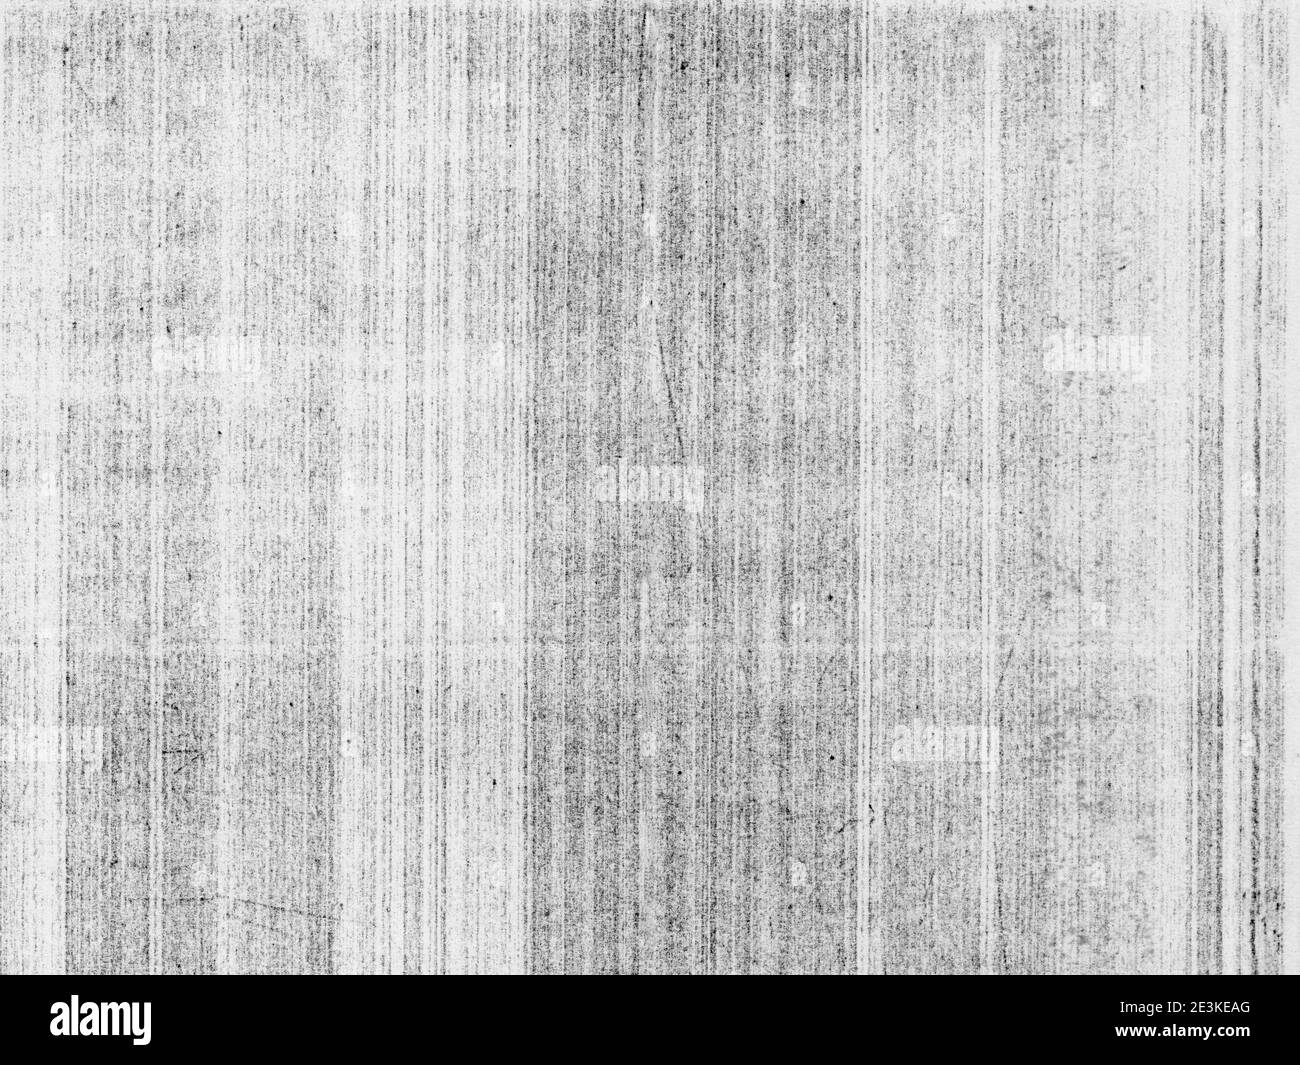 dark grunge dirty photocopy grey paper texture useful as a background Stock Photo